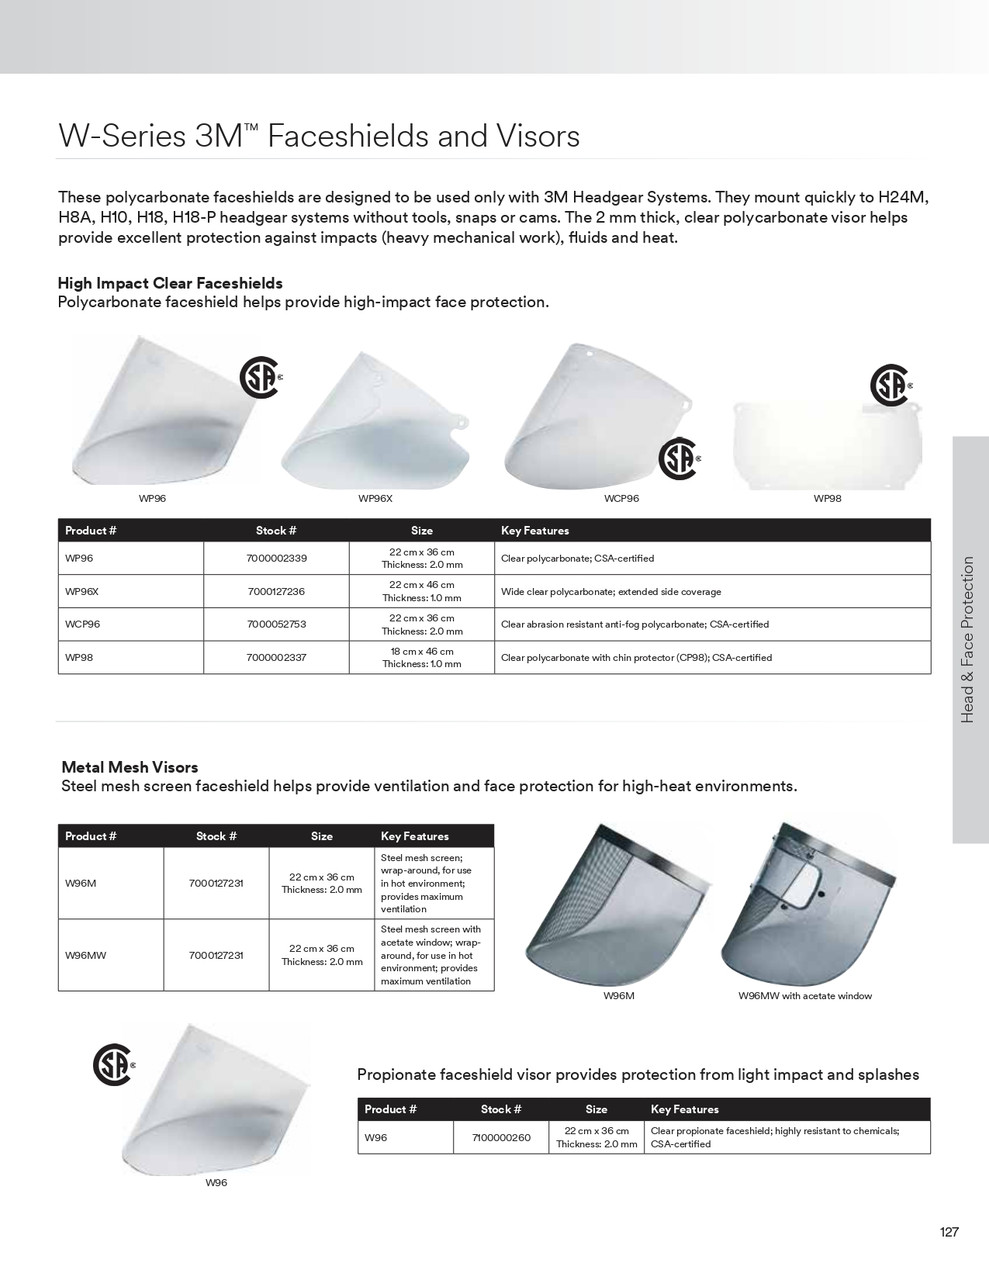 Replacement WP96 Polycarbonate Faceshield  WP96